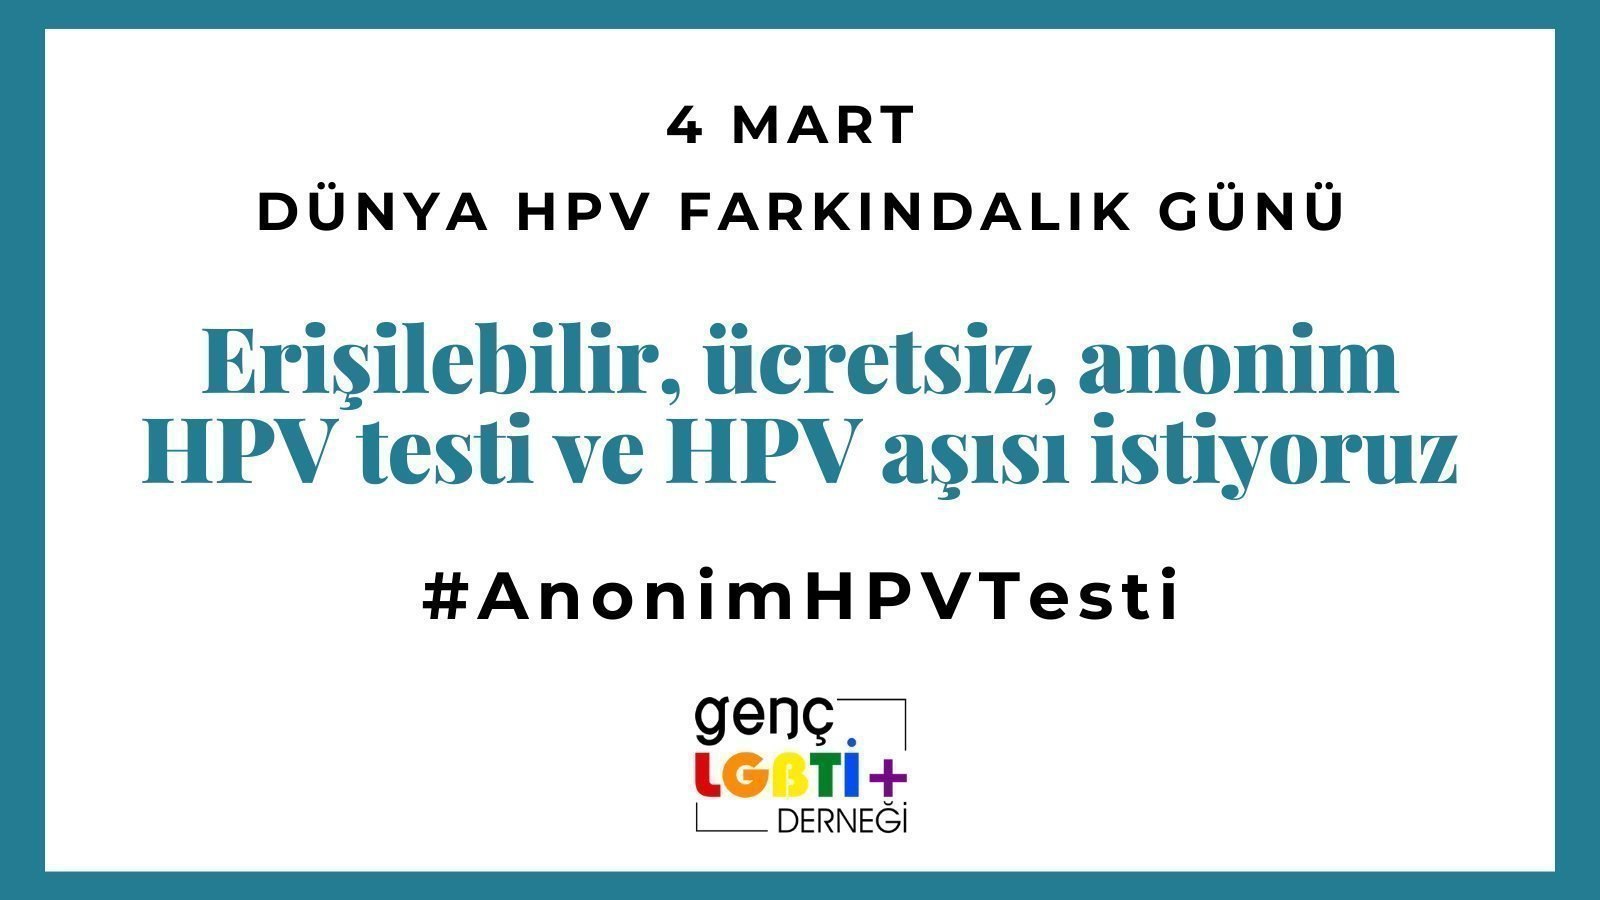 “We Want Anonymous HPV Test Centers” Campaign on its second year | Kaos GL - News Portal for LGBTI+ News